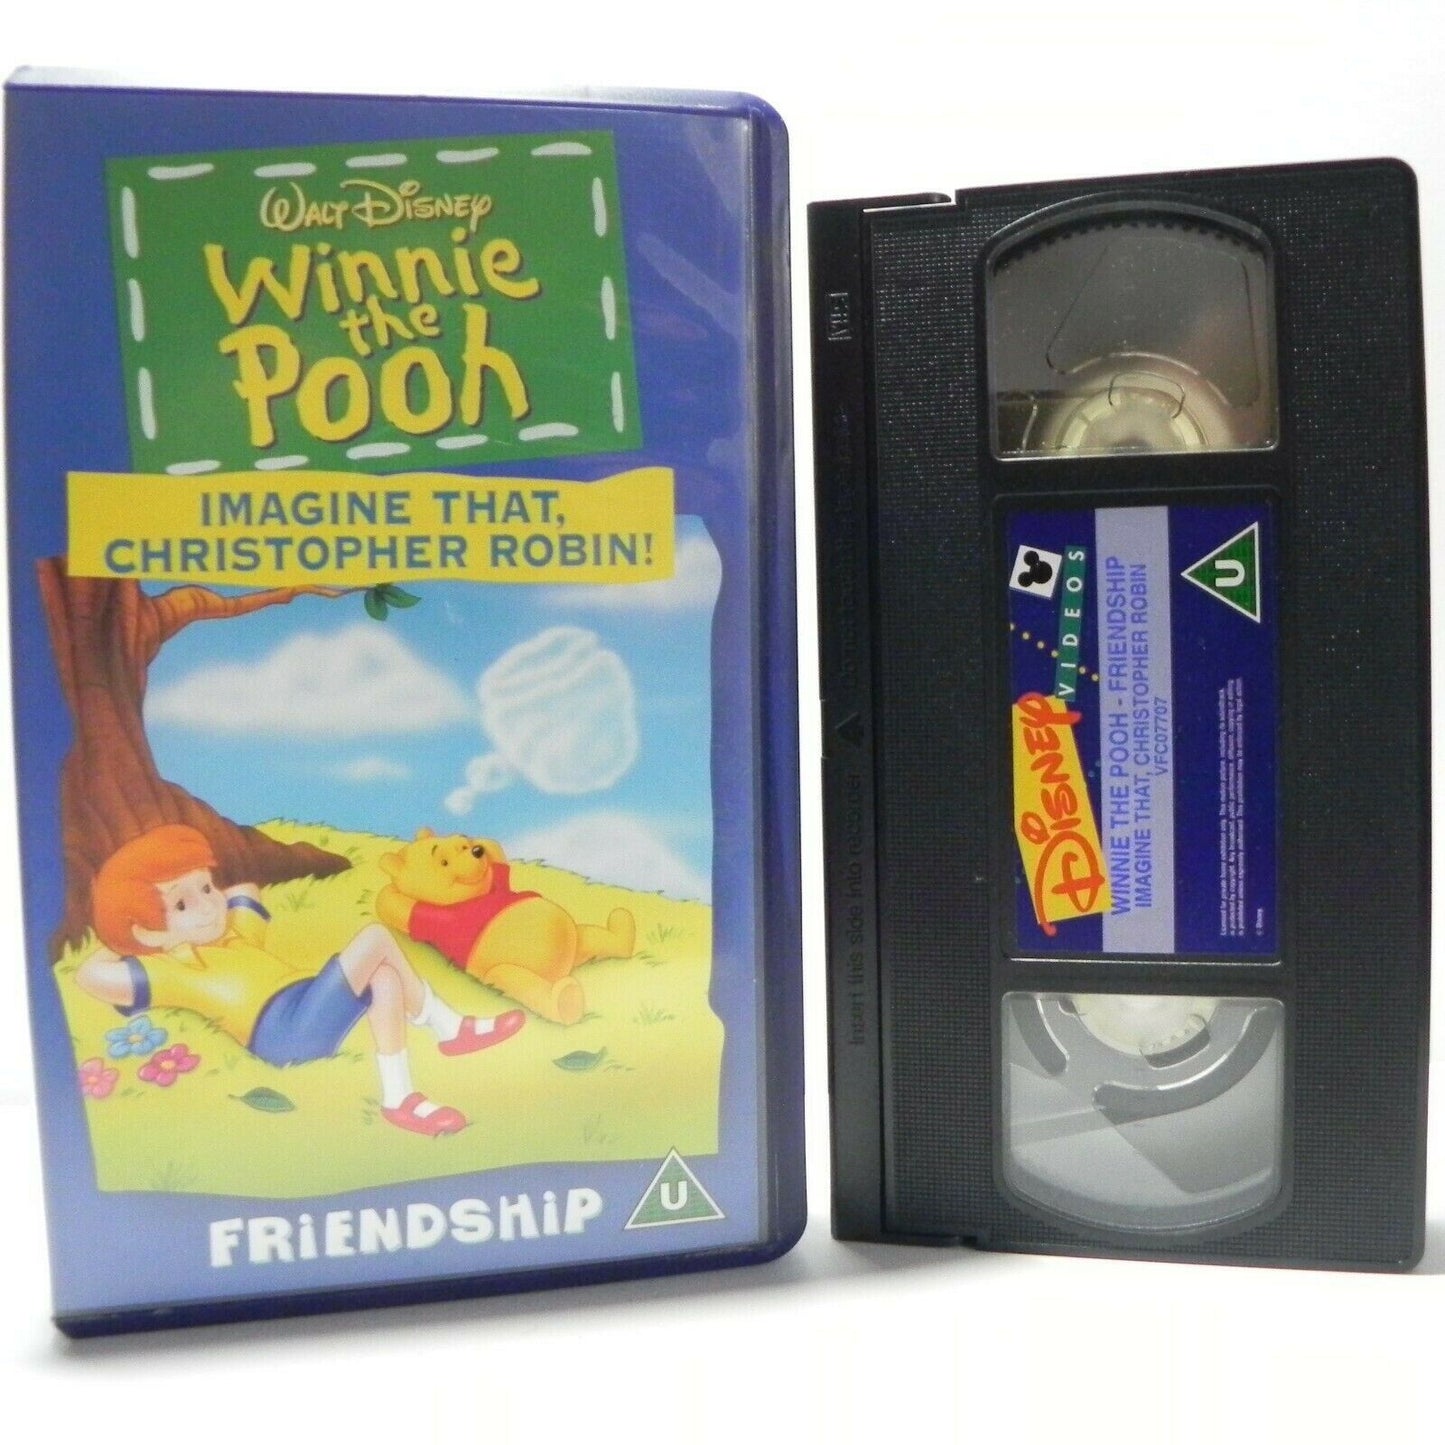 Winnie The Pooh: Frendship - Classic Animation - Heartwarming Tale - Kids - VHS-